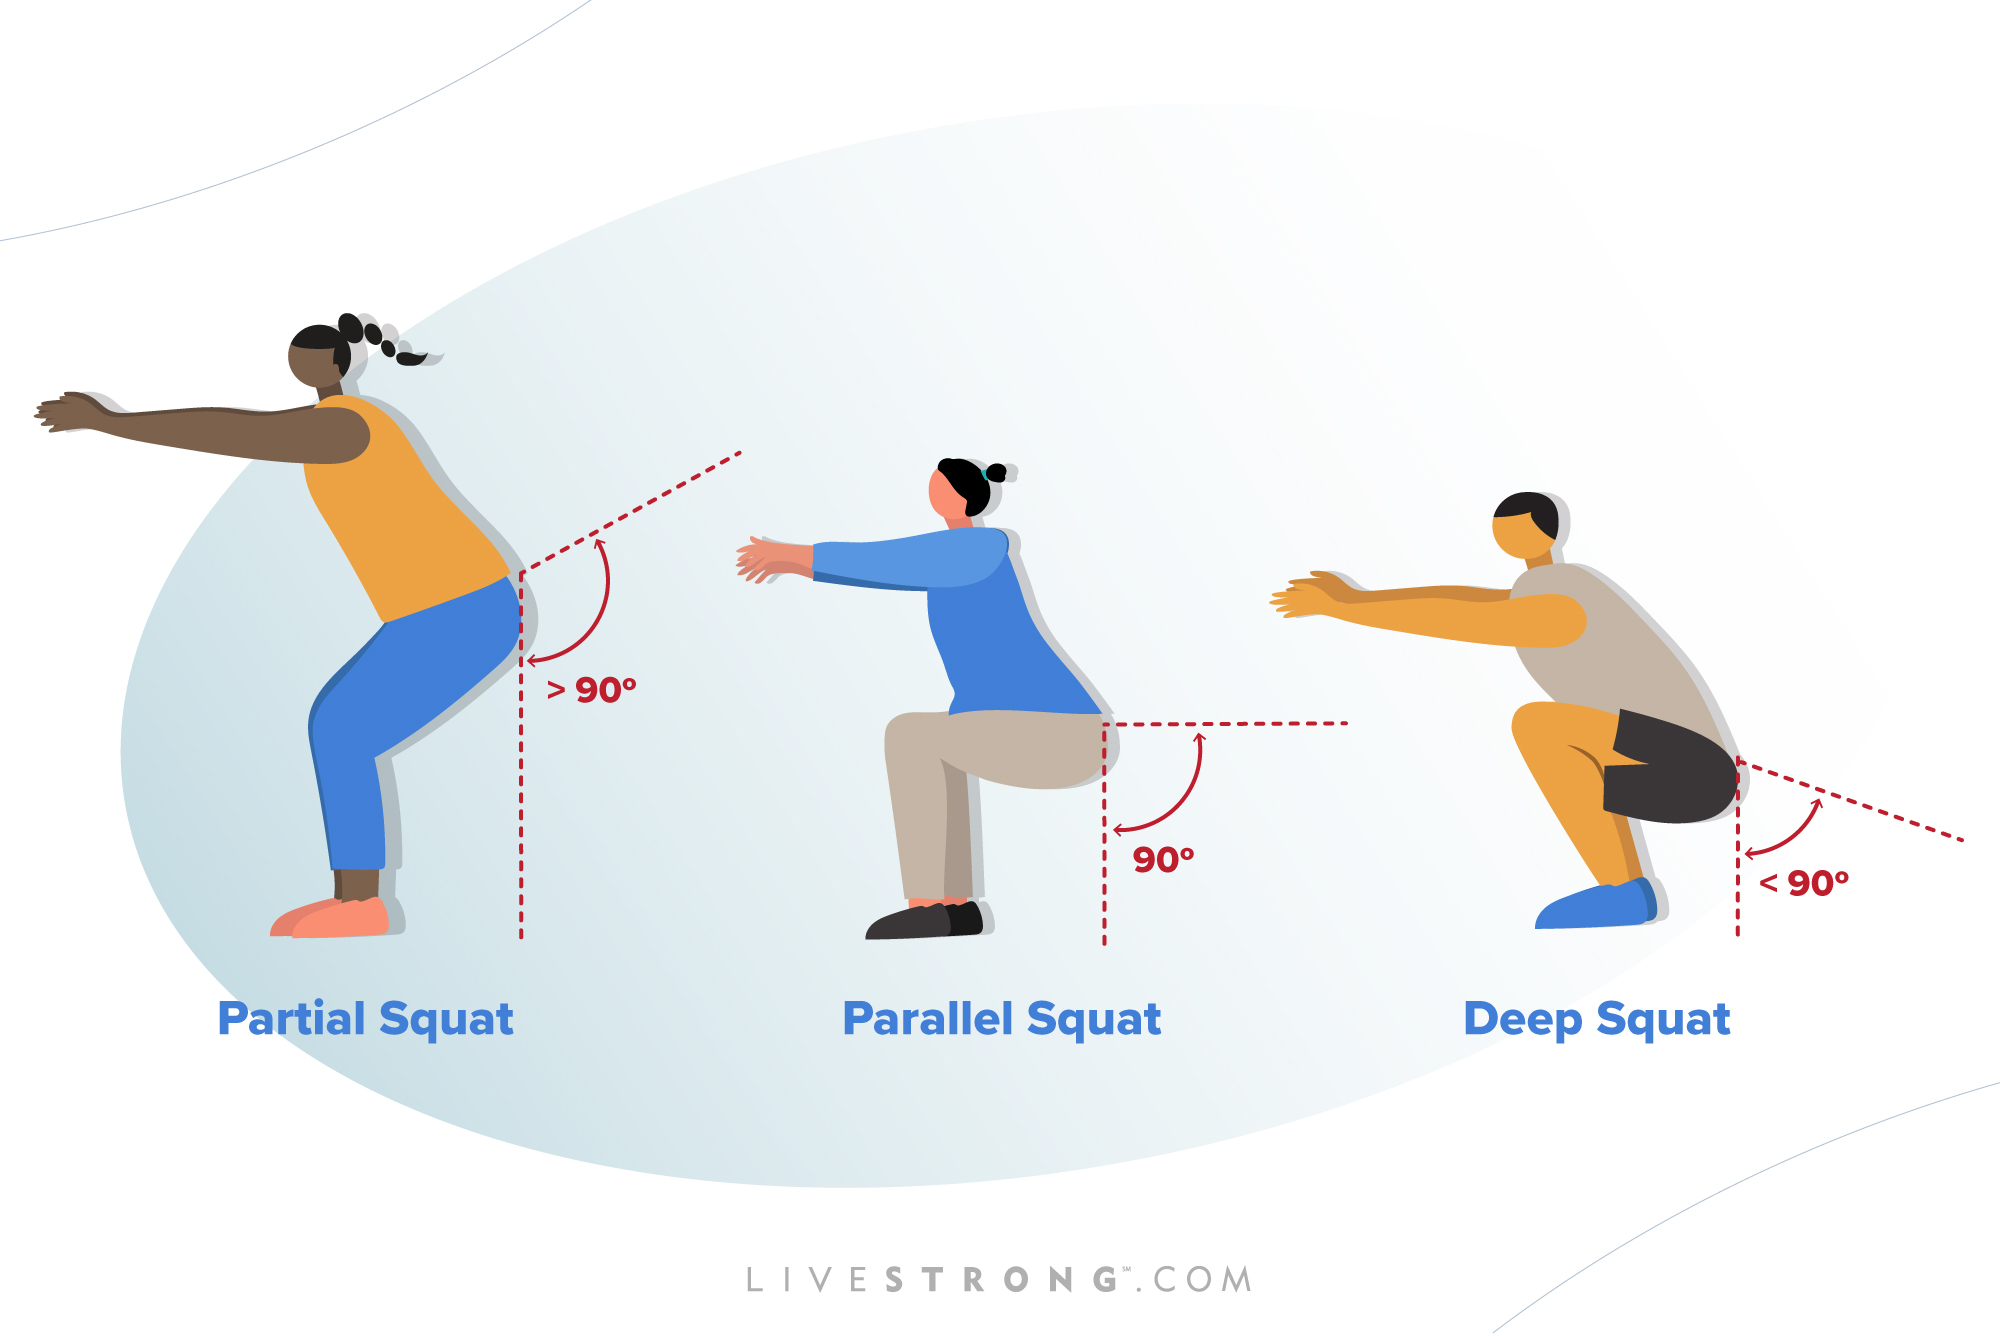 How to Do Squat Jumps: Techniques, Benefits, Variations